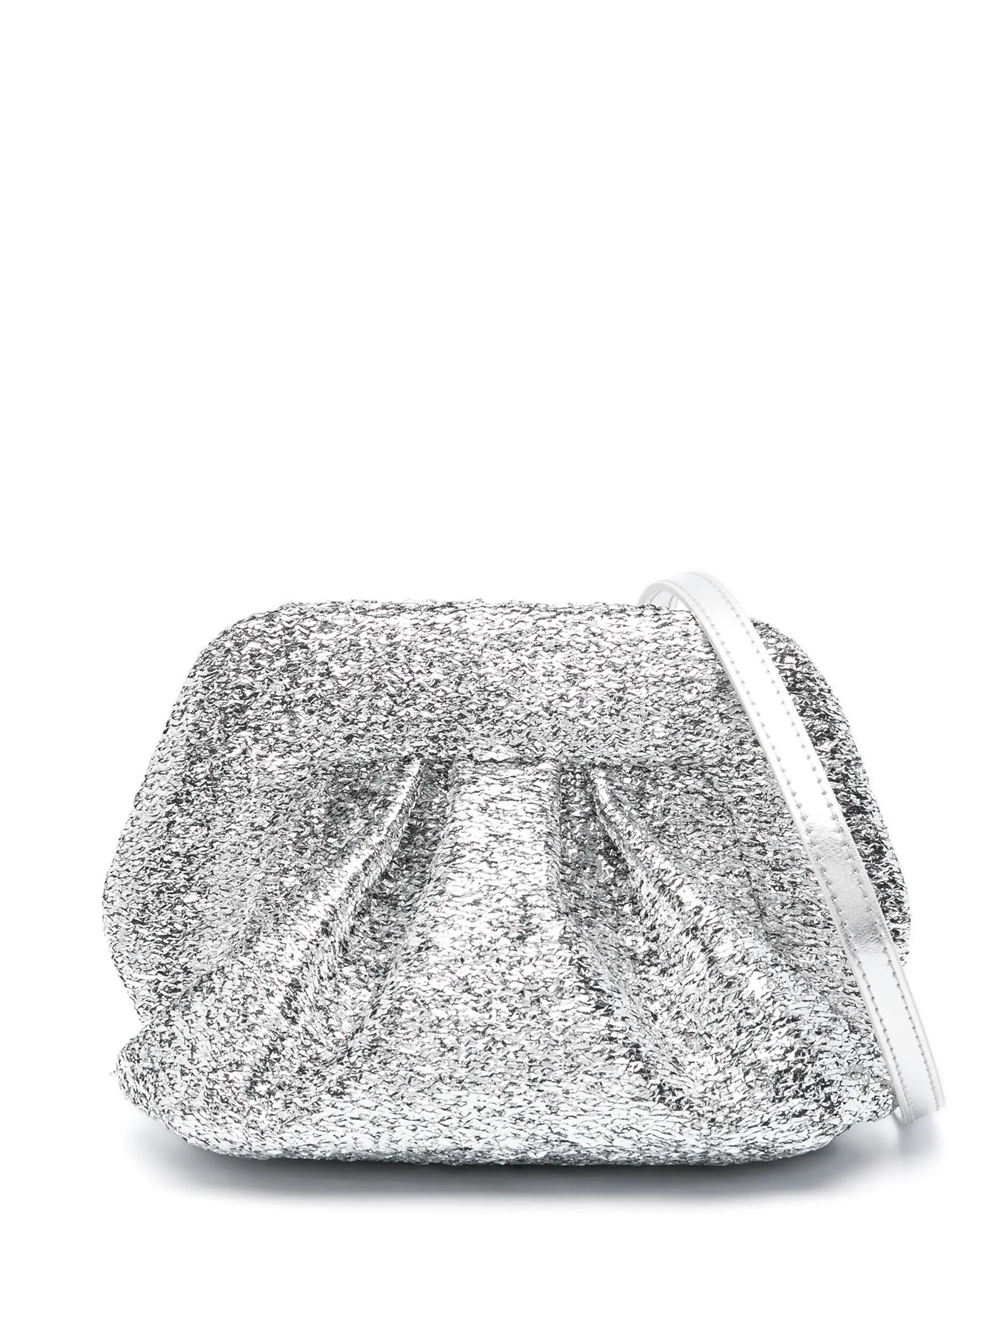 Themoire' Gea Sparkling Clutch Bag In Silver